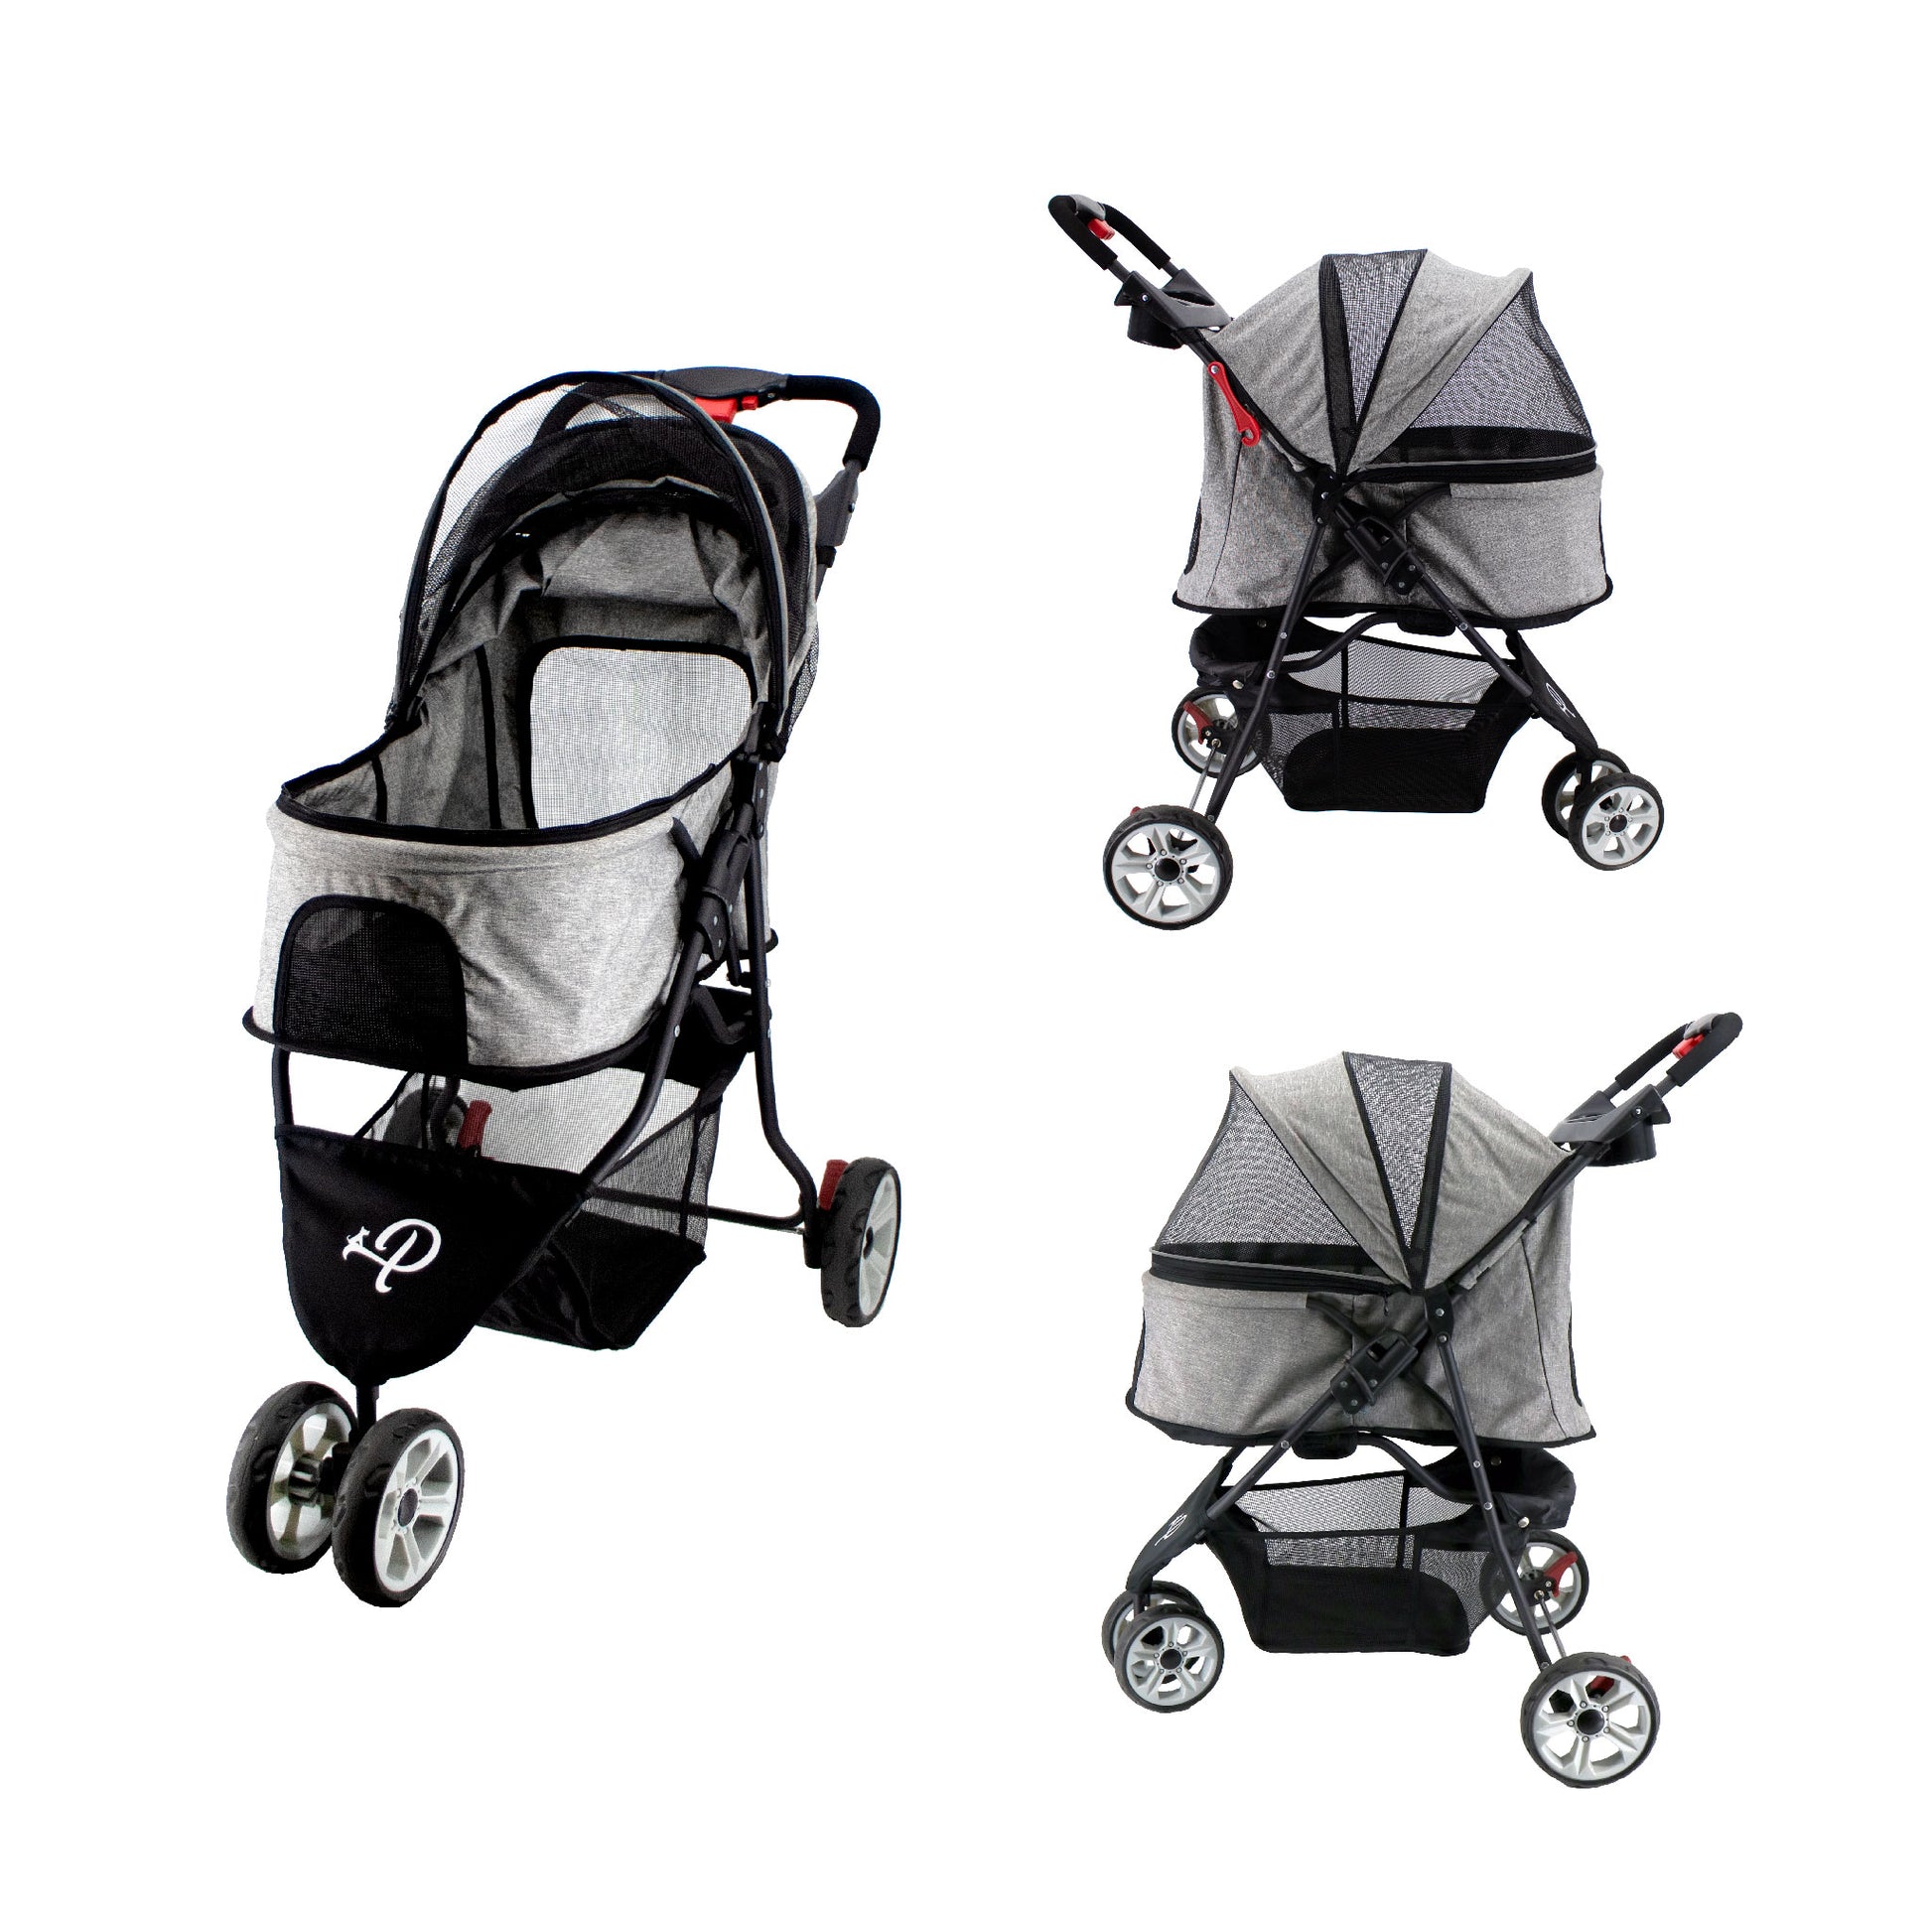 glacier pet stroller with canopy open and side view